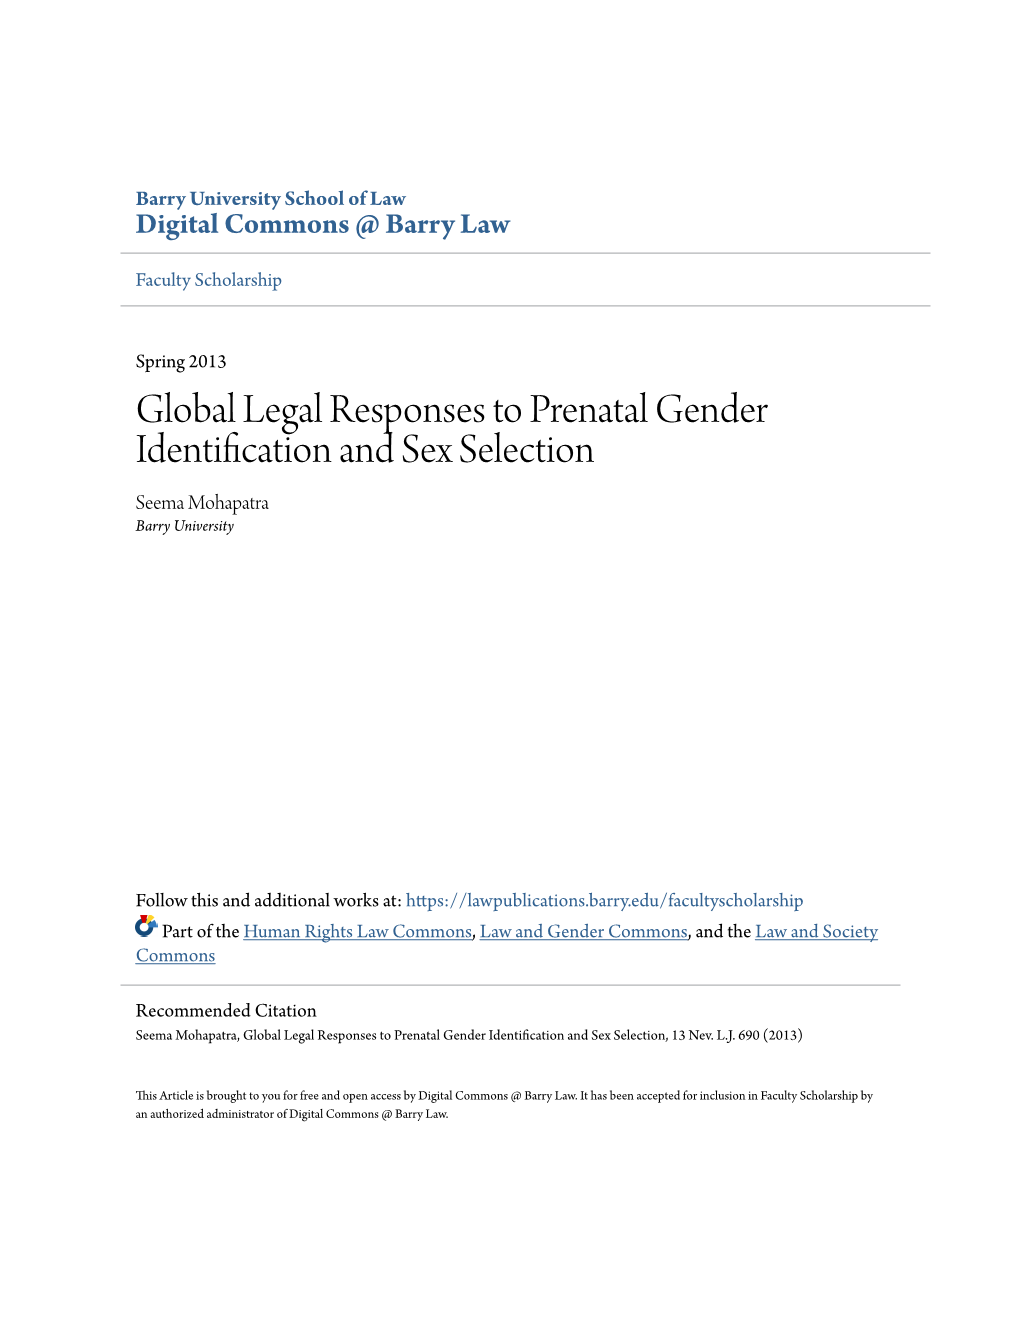 Global Legal Responses to Prenatal Gender Identification and Sex Selection Seema Mohapatra Barry University